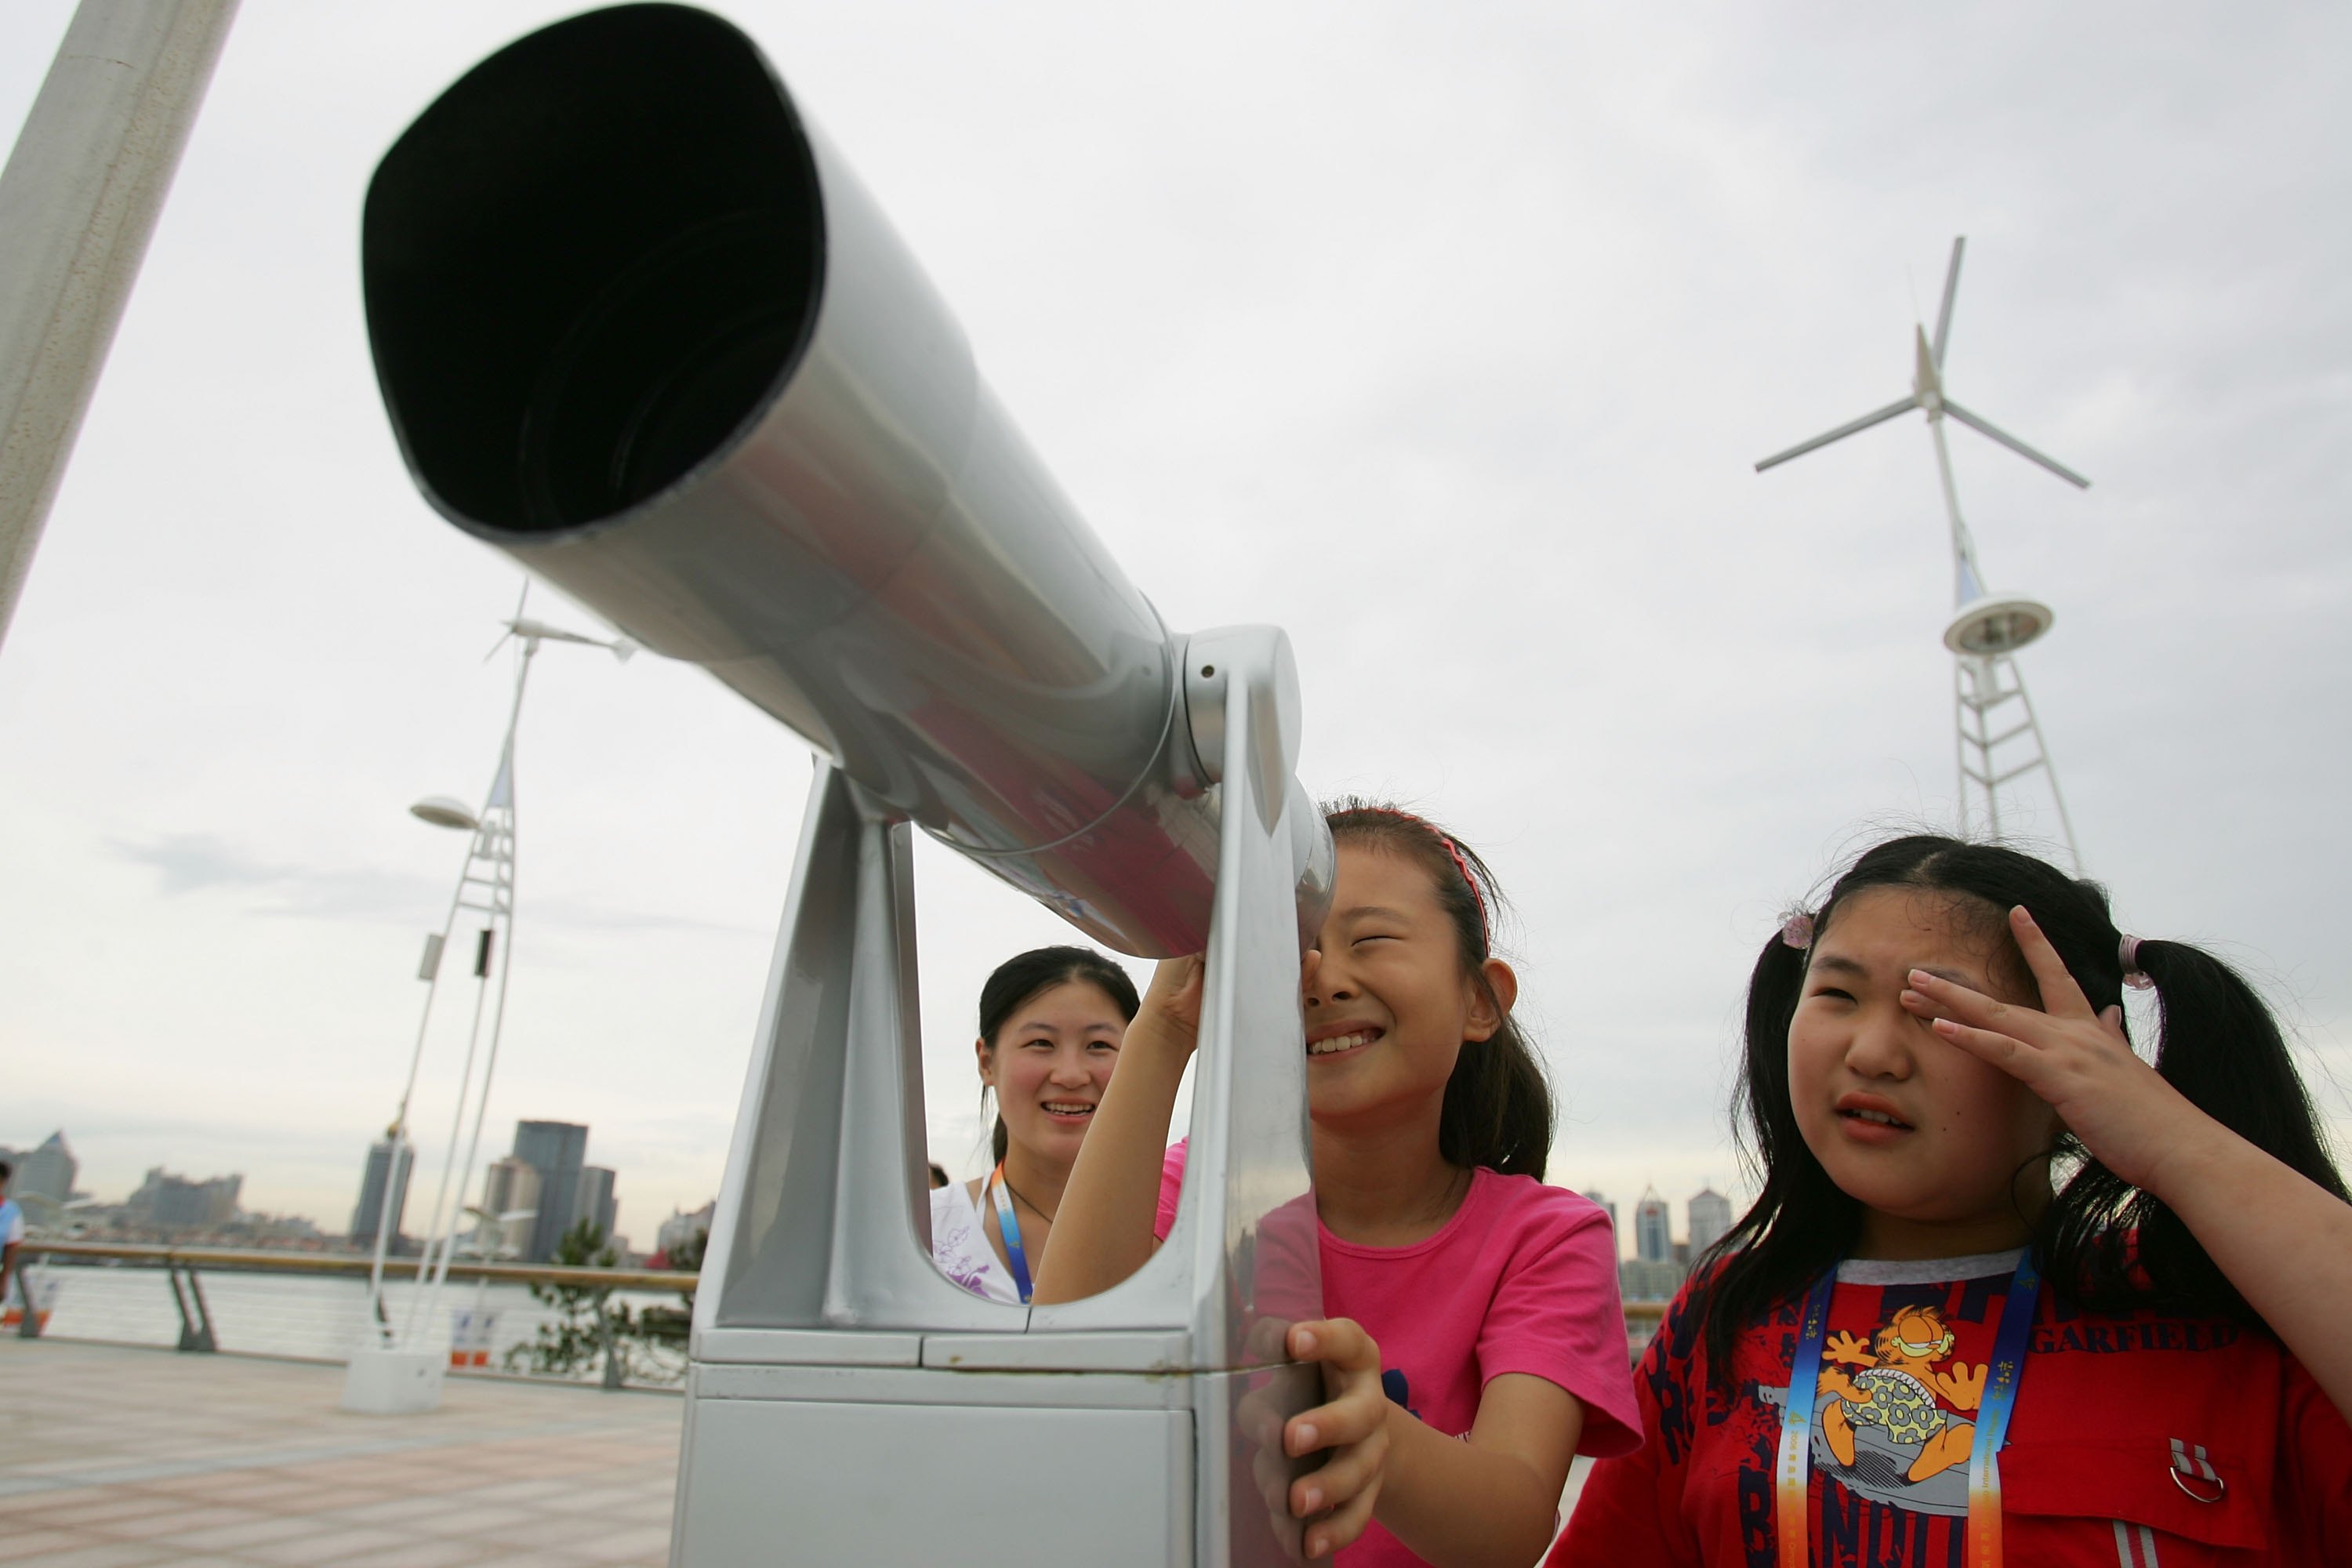 QINGDAO, SHANDONG - AUGUST 26:  Chinese children watch the competition with a telescope at the race observation area of the Qingdao Olympic Sailing Center during the 2006 Qingdao International Regatta, which is the first official test event for the 2008 B